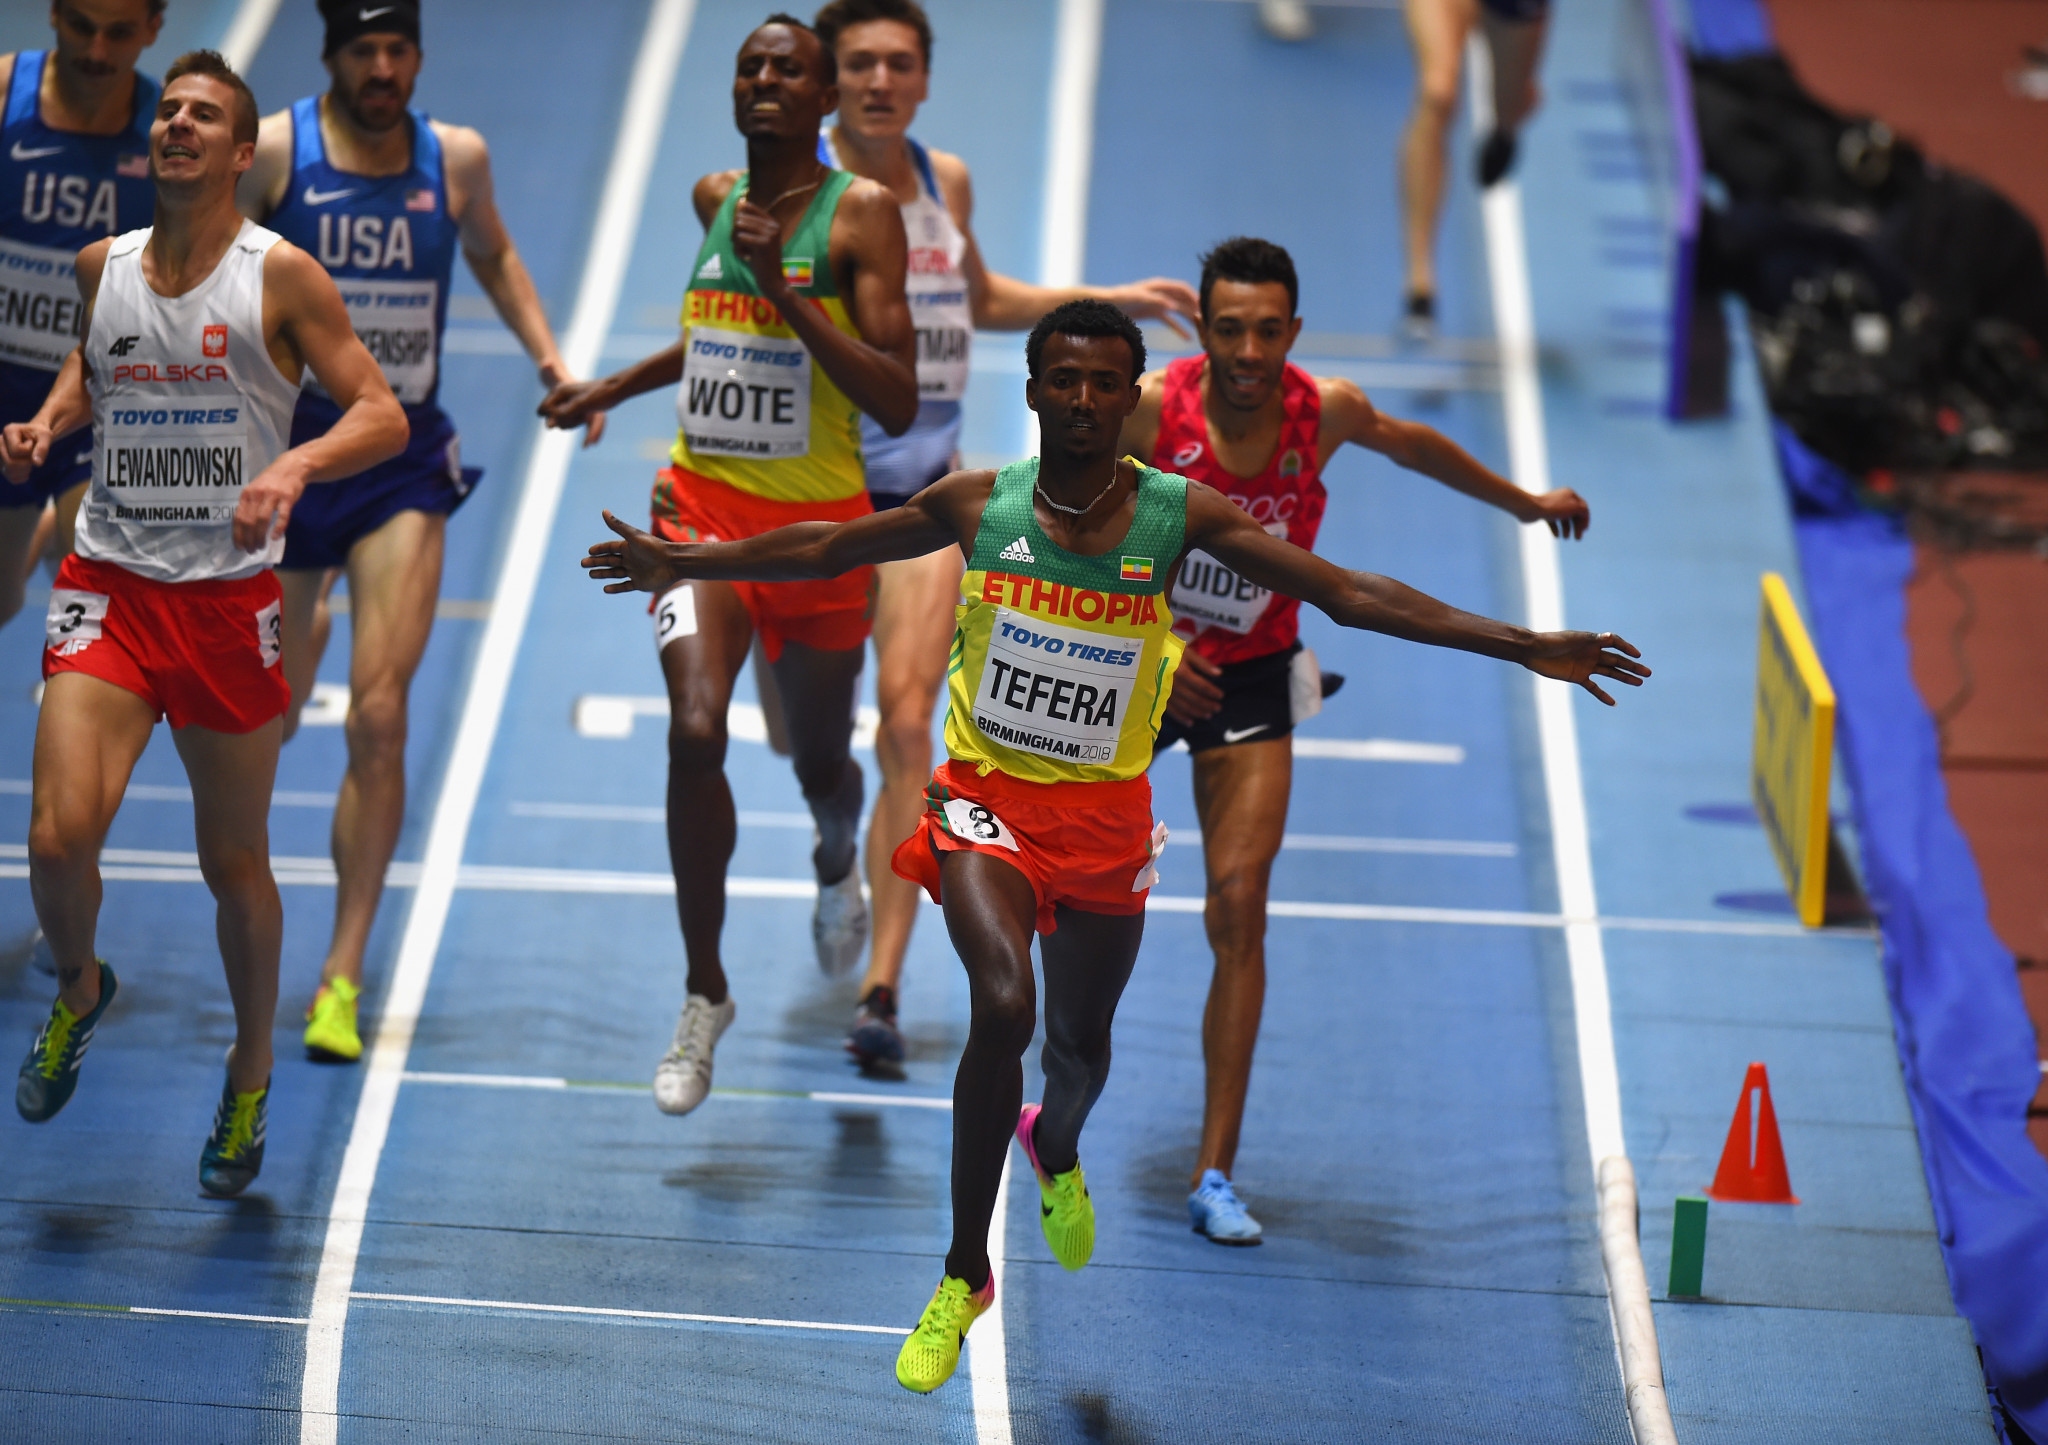 Victory and world lead for Tefera in men's 1500m at IAAF World Indoor Tour in Torun 